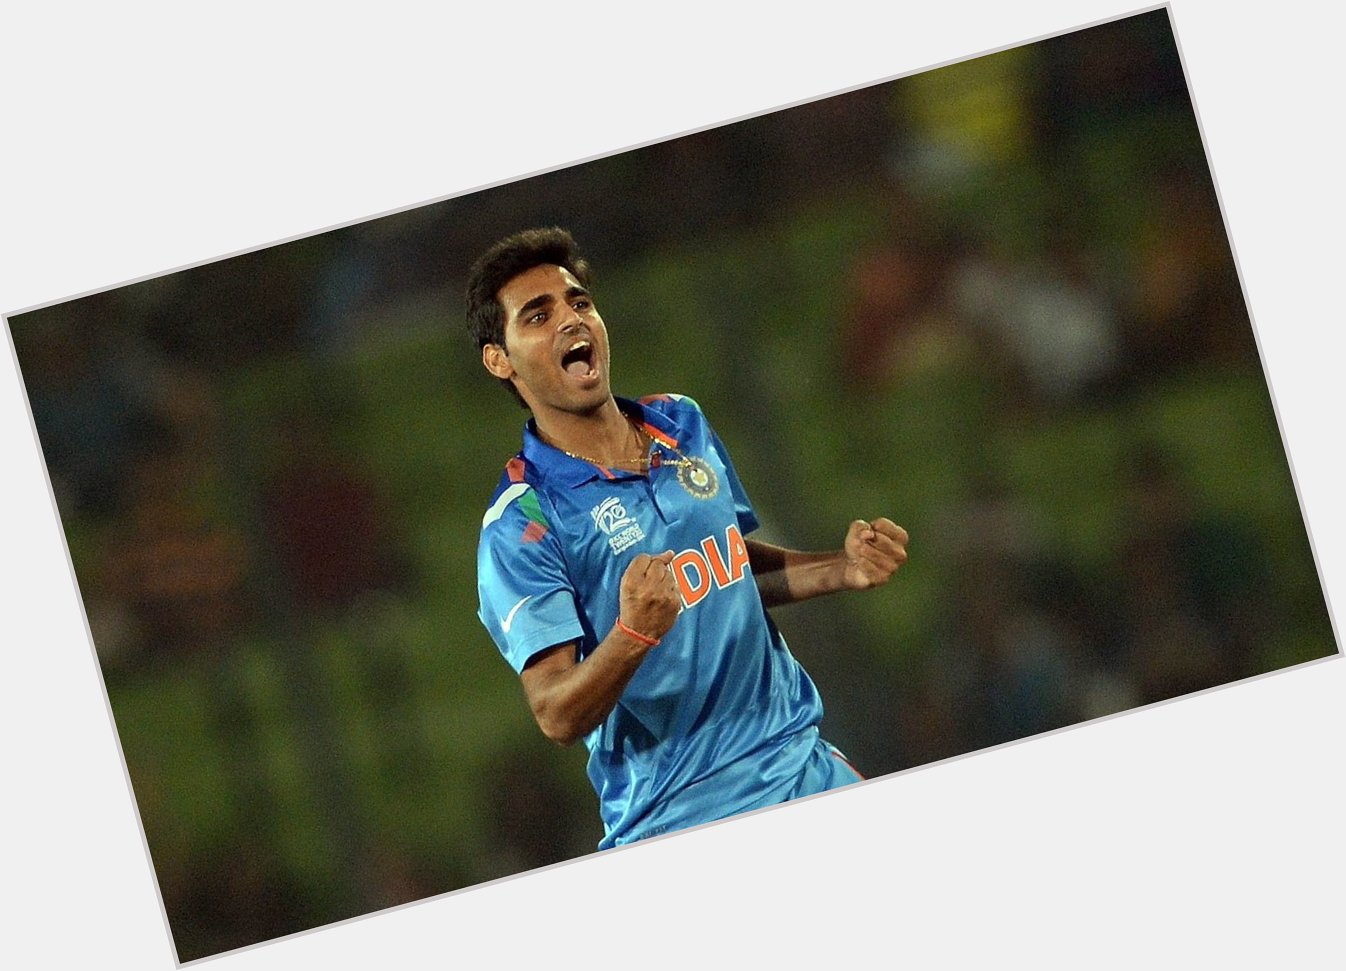 Happy birthday to Indian pacer Bhuvneshwar Kumar - 42 wickets in Tests, 61 in ODIs & 16 in T20Is. 